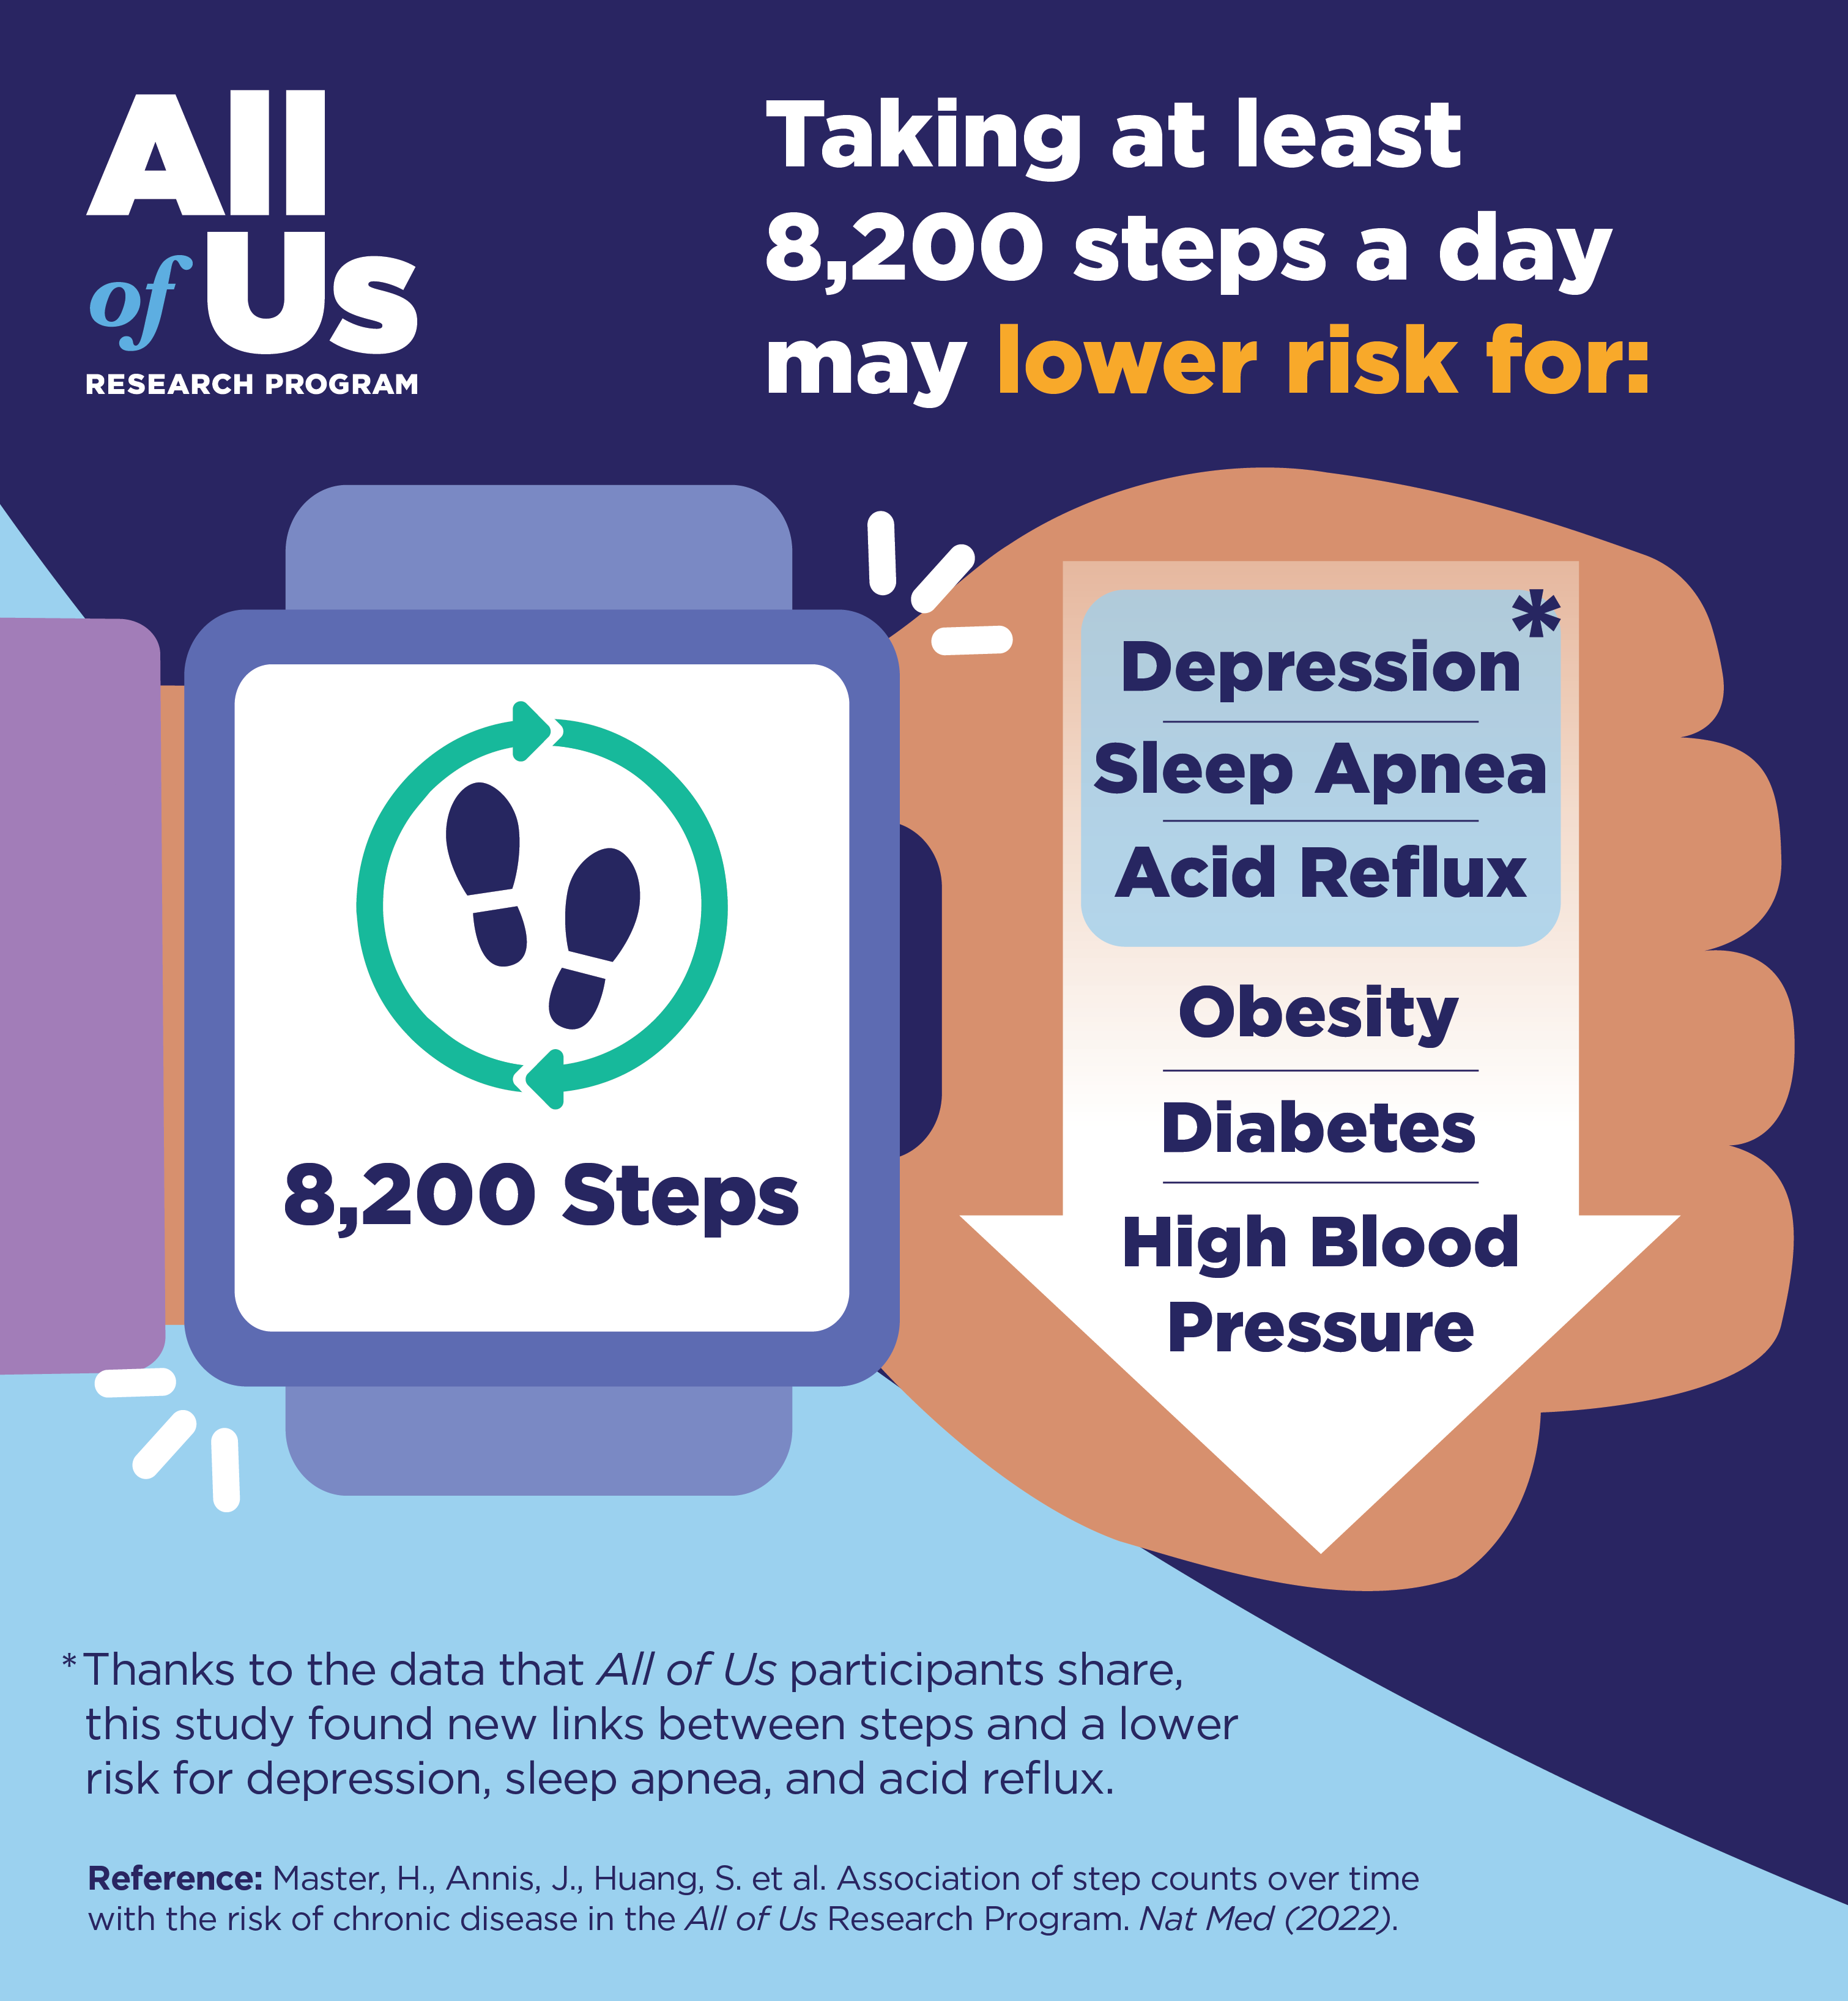 Logo of the All of Us Research Program. Taking at least 8200 steps a day may lower risk for depression, sleep apnea, acid reflux, obesity, diabetes and high blood pressure. Thanks to the data that All of Us participants share, this study found new links between steps and a lower risk for depression, sleep apnea and acid reflux. Reference: Master, H., et al. Association of step counts over time with the risk of chronic disease in the All of Us Research Program. Nature Medicine 2022.